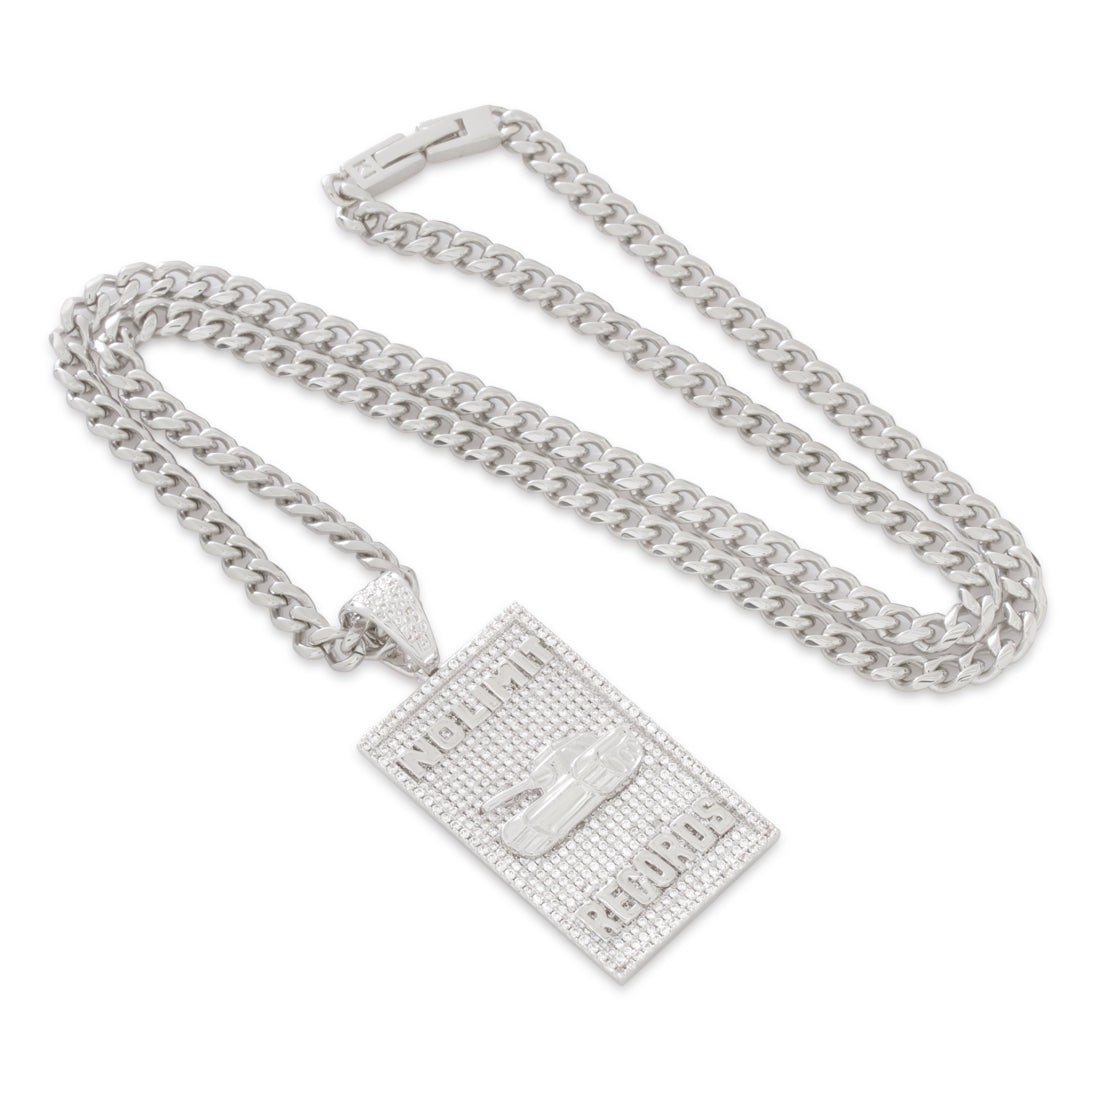 No Limit Records x King Ice - 98 Dynasty Dog Tag Necklace